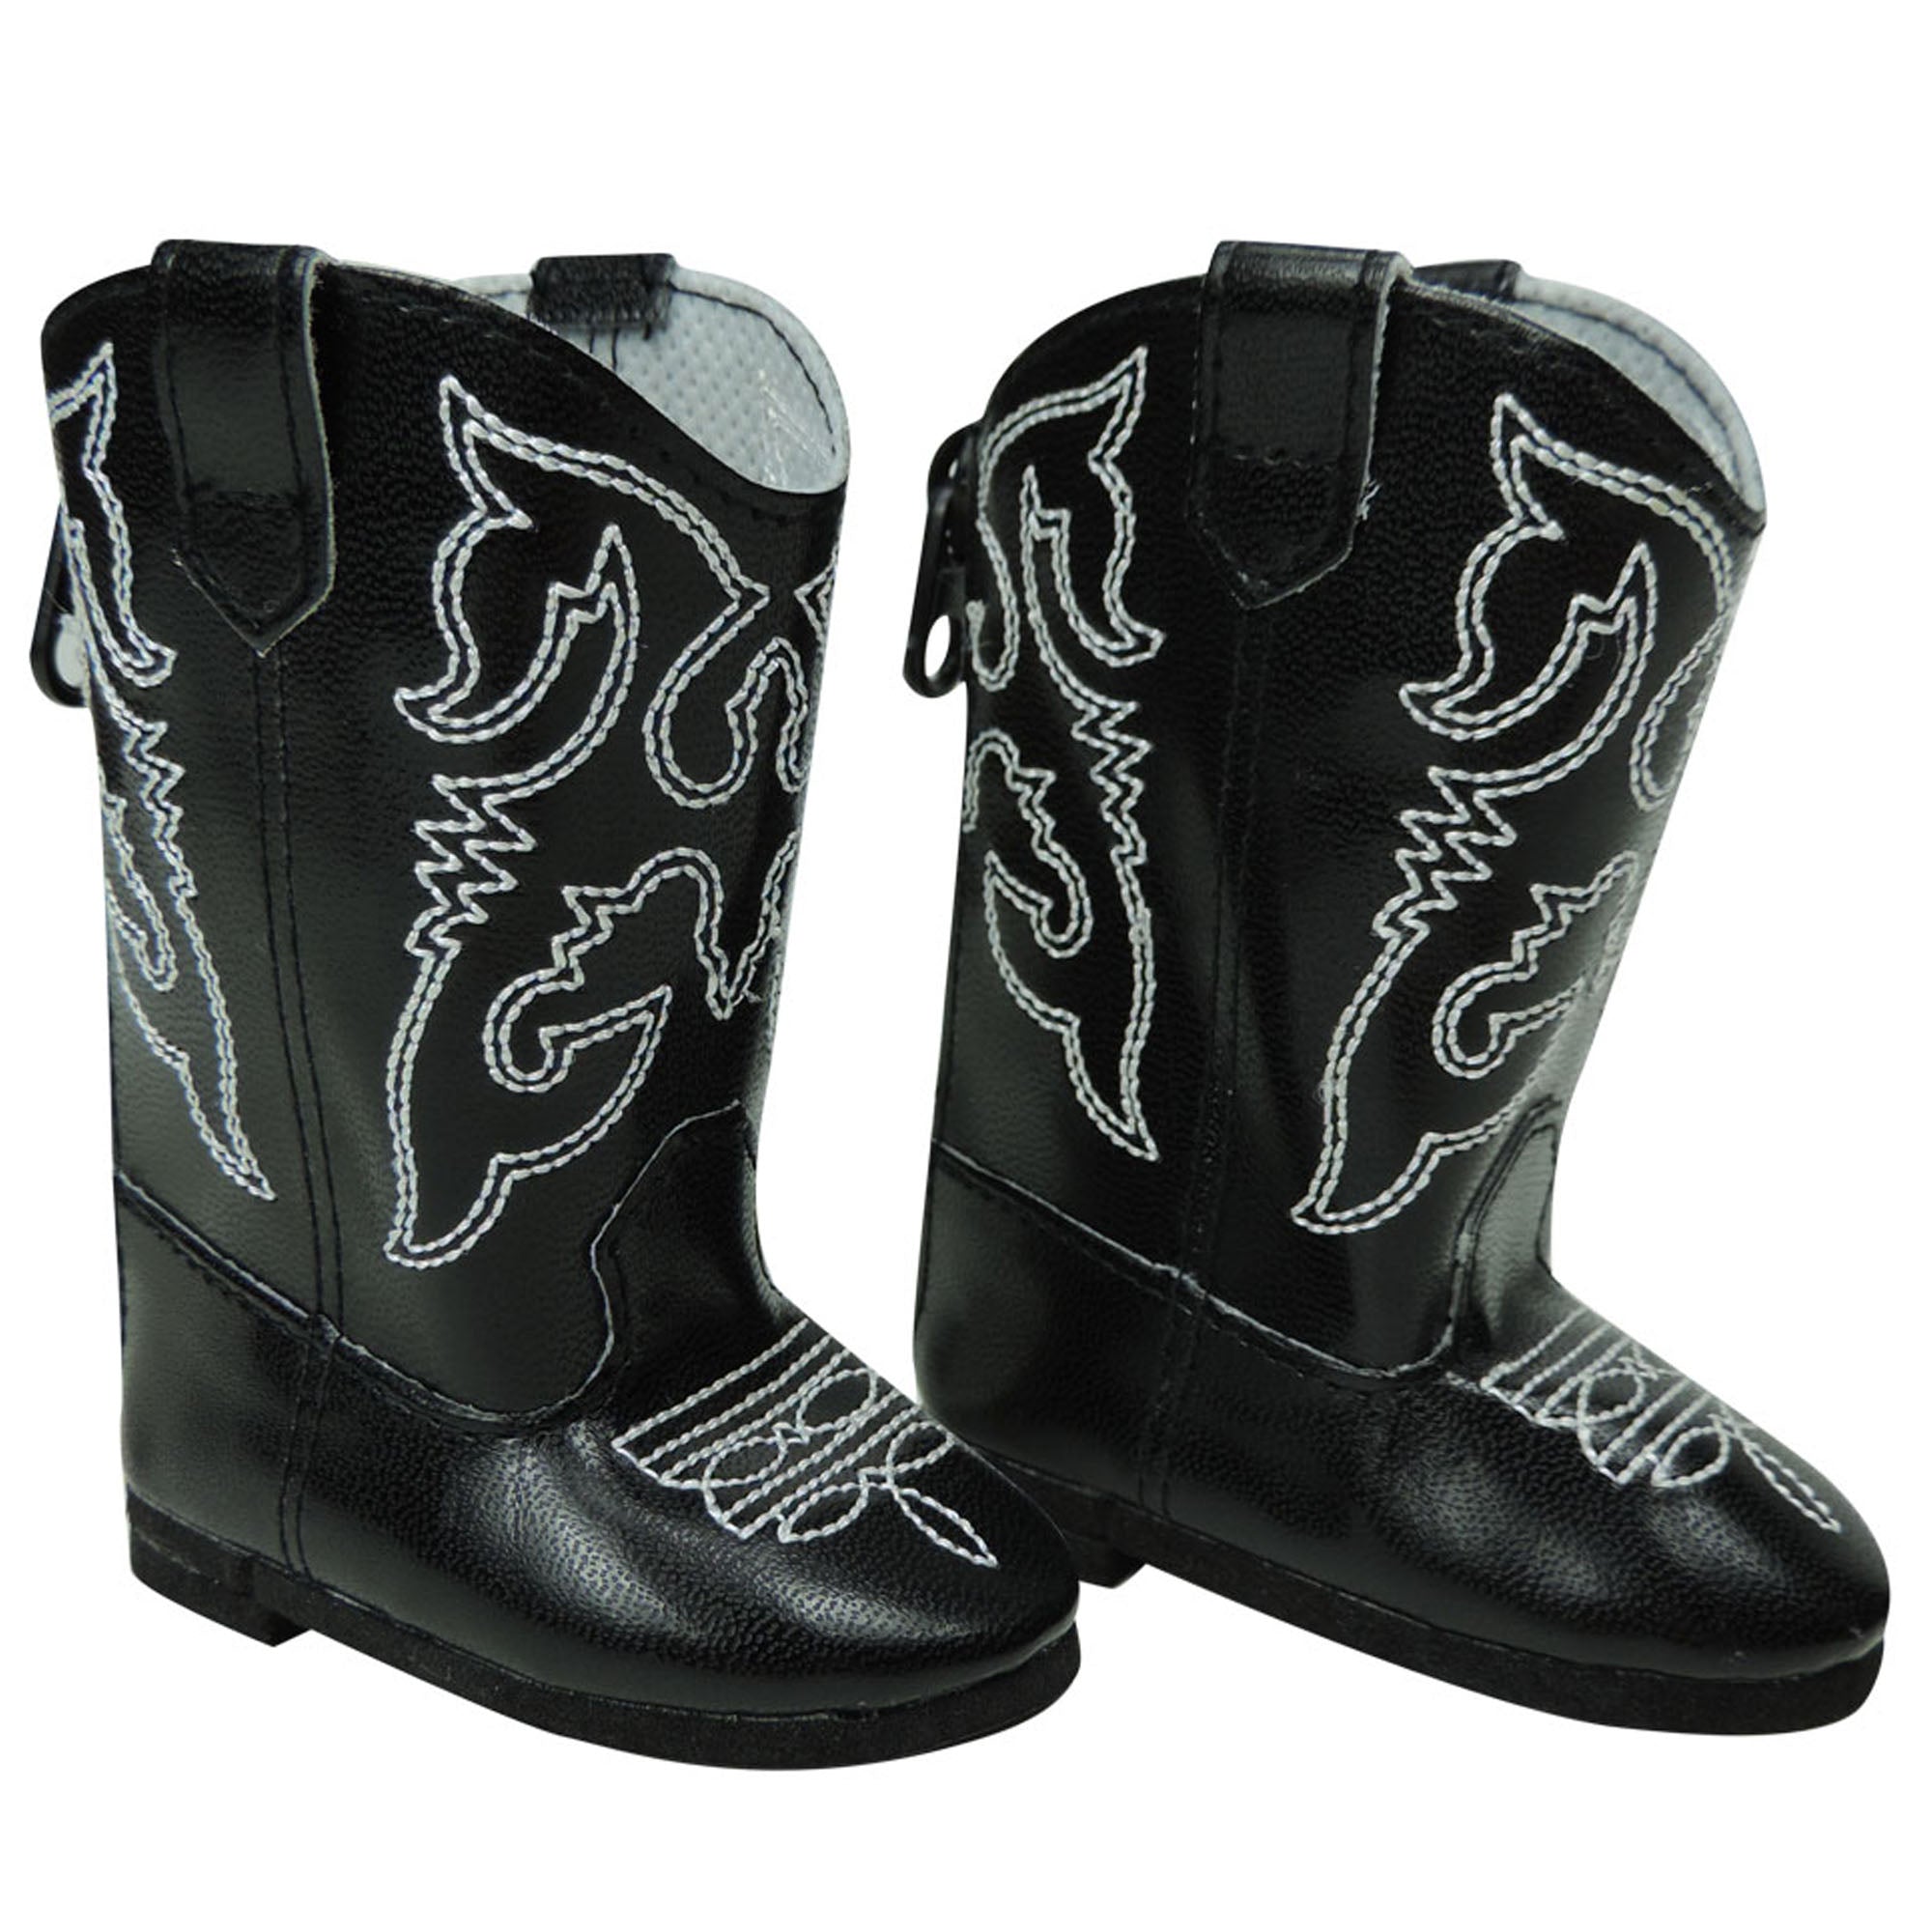 Sophia’s Gender-Neutral Western Faux Leather Cowboy Boots with Traditional Embroidered Details and Zip-Up Back for 18” Dolls, Black